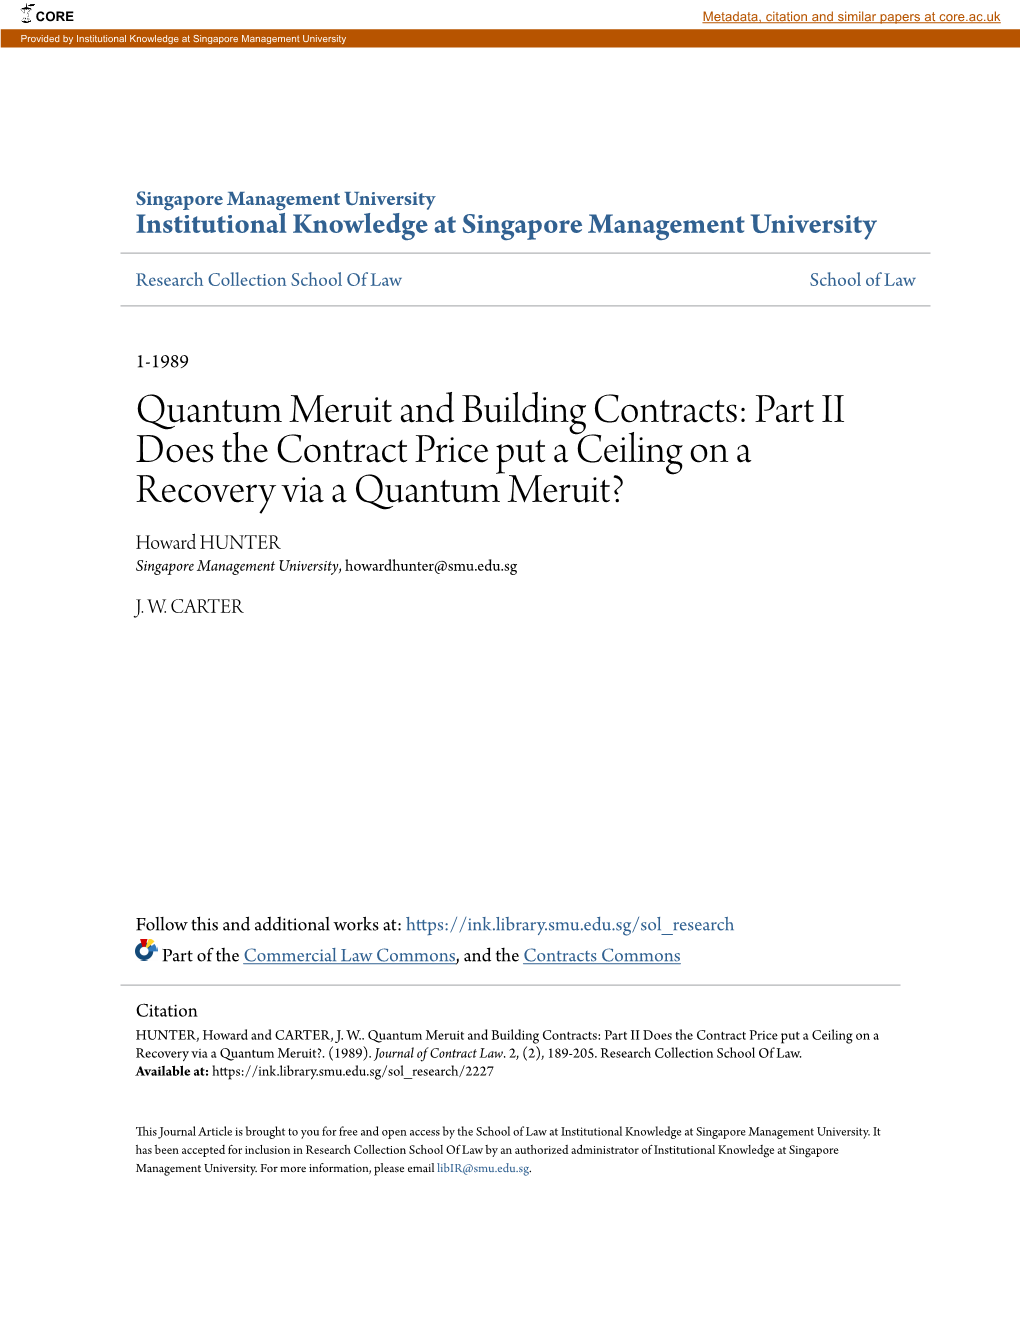 Quantum Meruit and Building Contracts